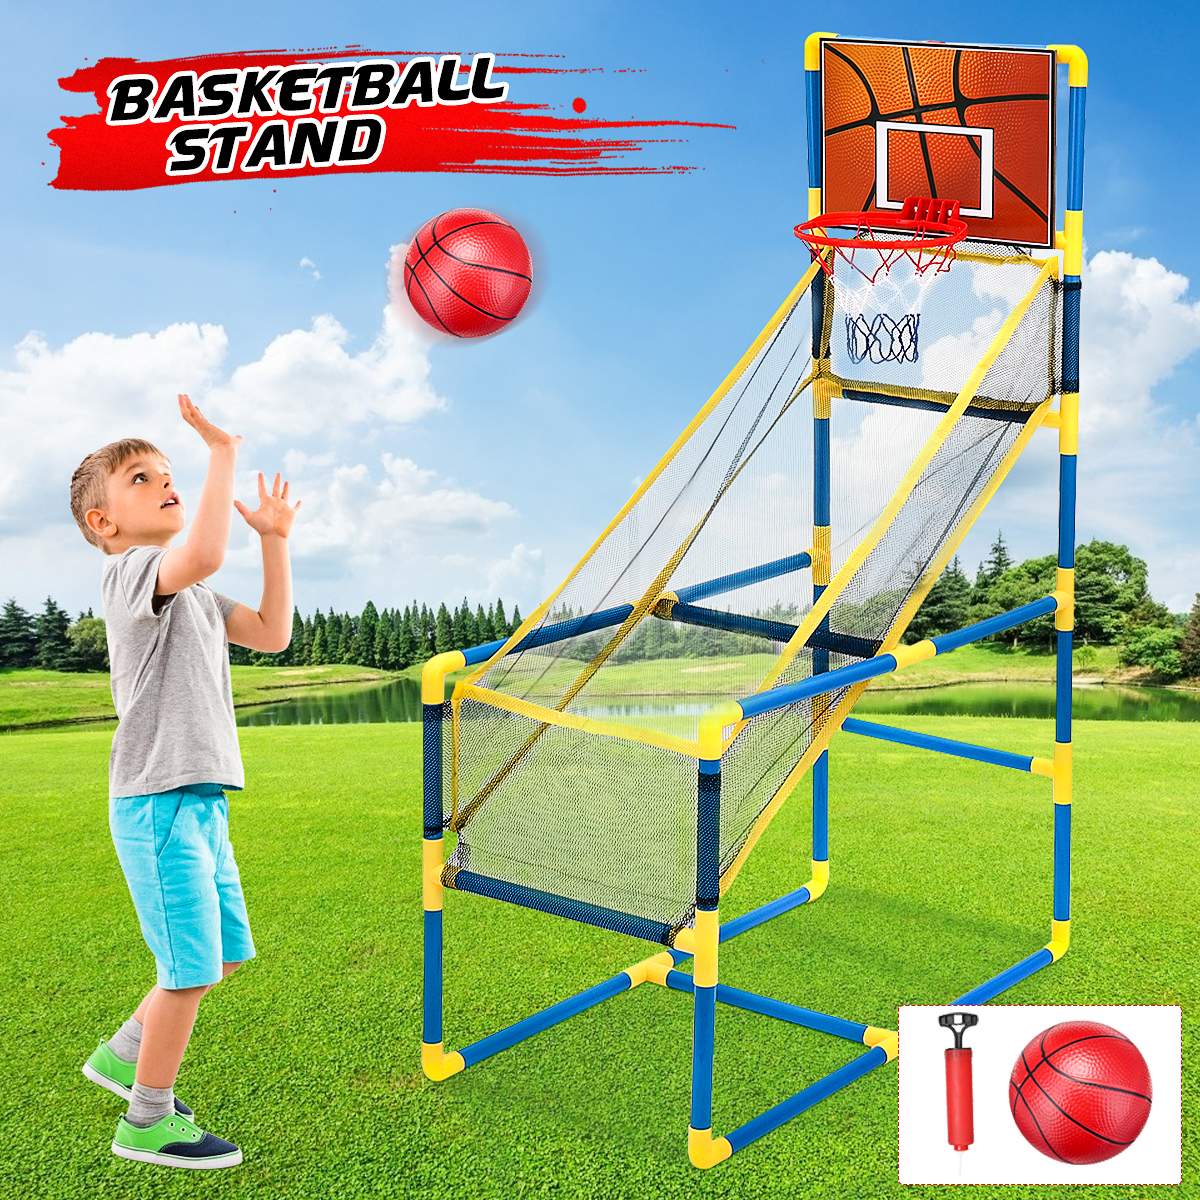 Children-Lightweight-Portable-Easy-Assemble-Basketball-Stand-Adjustable-Indoor-Outdoor-Sports-Toys-w-1829730-1